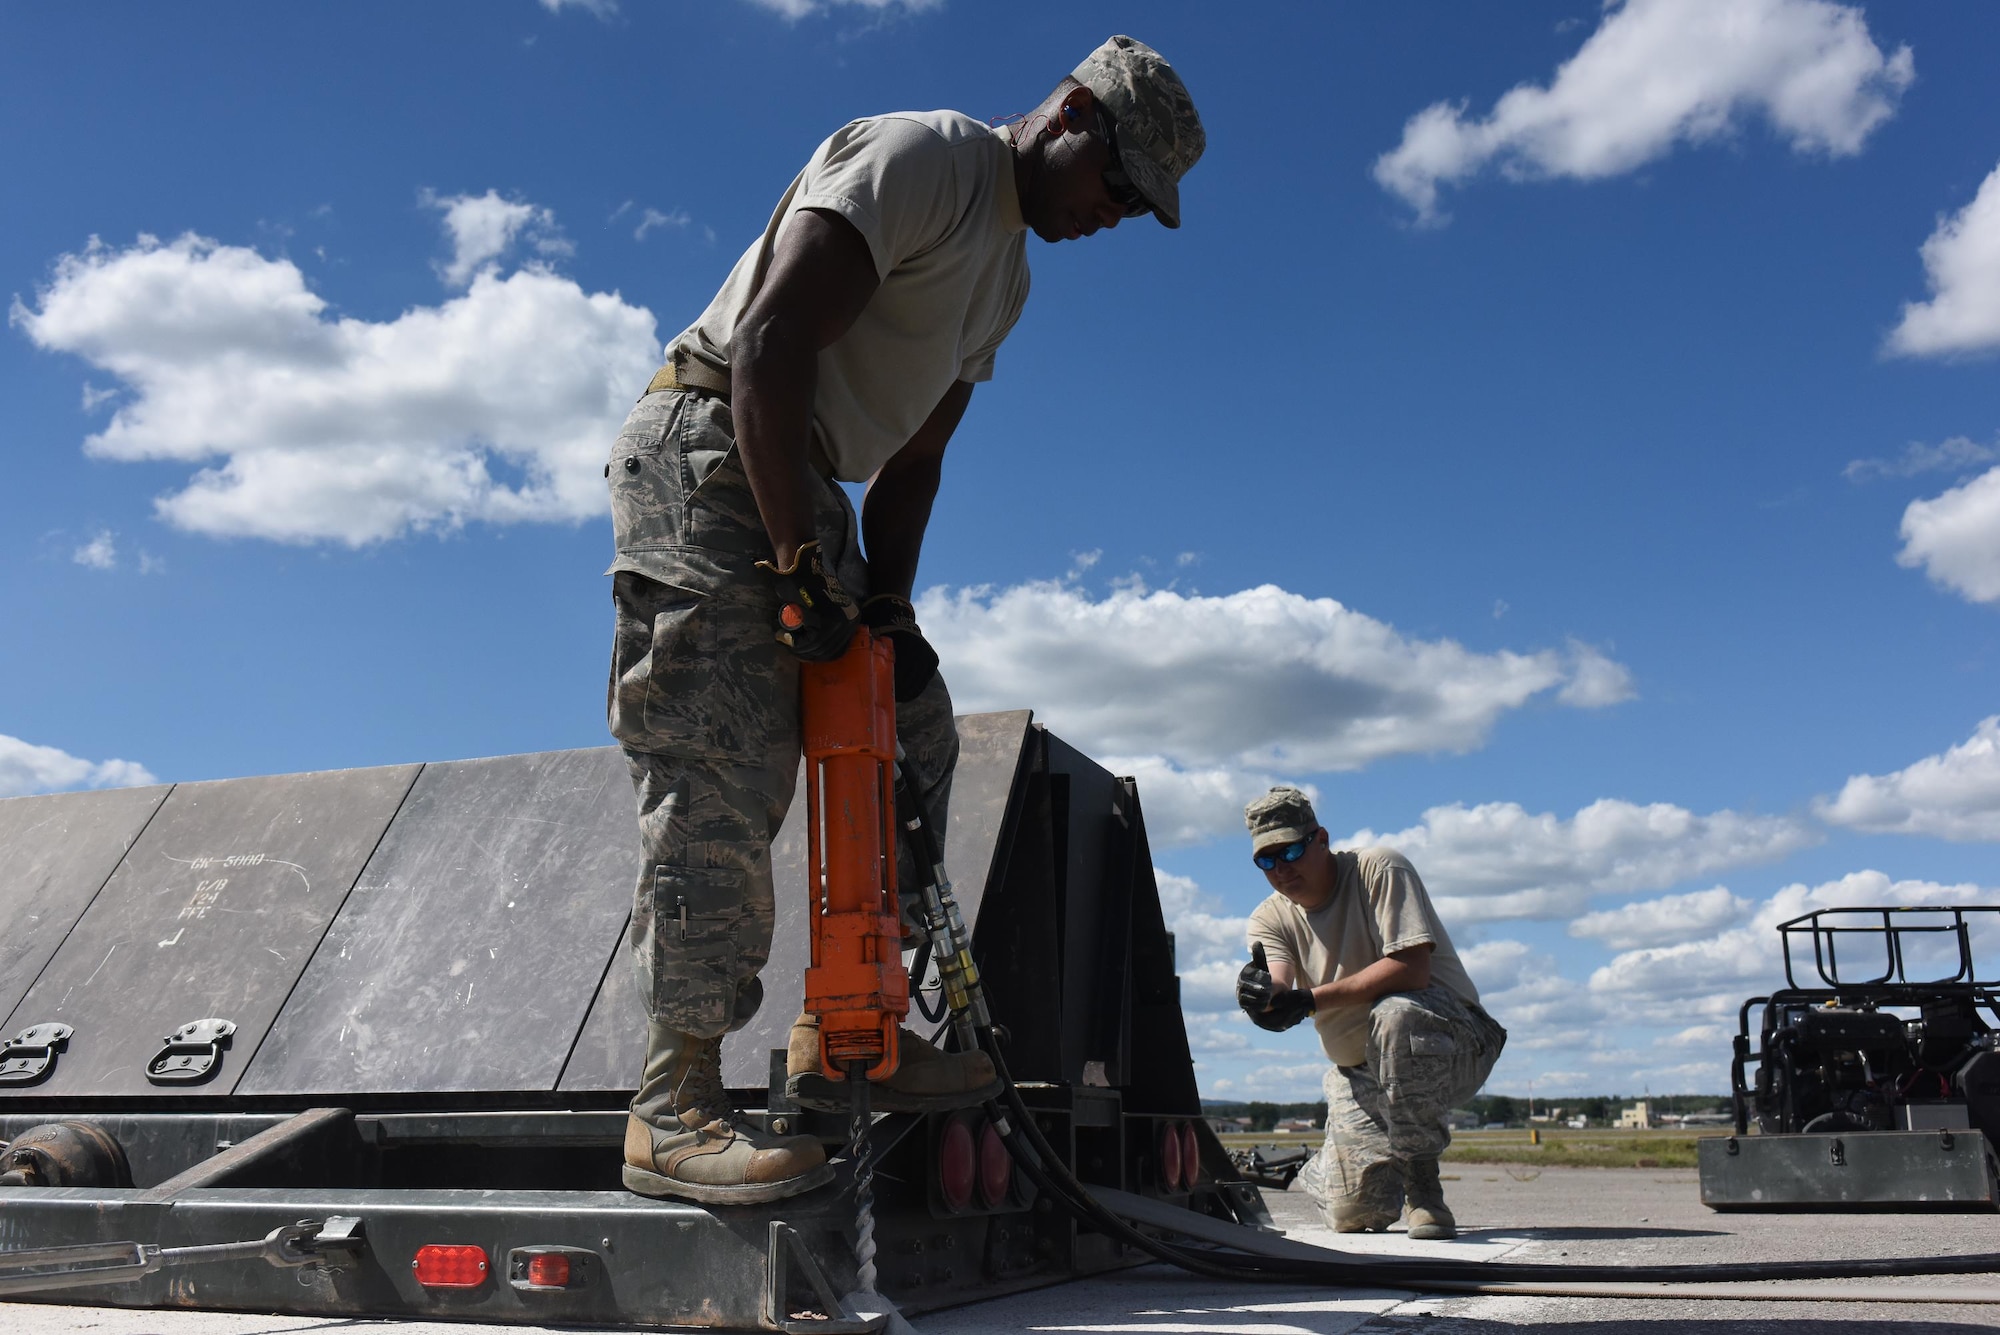 Electrical power production craftsmen from the 138th Fighter Wing from the Tulsa Air National Guard Base in Tulsa, Oklahoma and 137th Special Operations Wing from Will Rogers Air National Guard Base in Oklahoma City install components for a mobile aircraft arresting system at the Silver Flag training site at Ramstein Air Base, Germany, Aug. 7, 2017. The training was part of an exercise that allowed Oklahoma Air National Guardsmen from the 137th Special Operations Wing, Will Rogers Air National Guard Base, Oklahoma City, and the 138th Fighter Wing, Tulsa Air National Guard Base, Tulsa, Oklahoma, to integrate different career fields and units for a realistic contingency environment. (U.S. Air National Guard photo by Senior Airman Caitlin G. Carnes/Released)